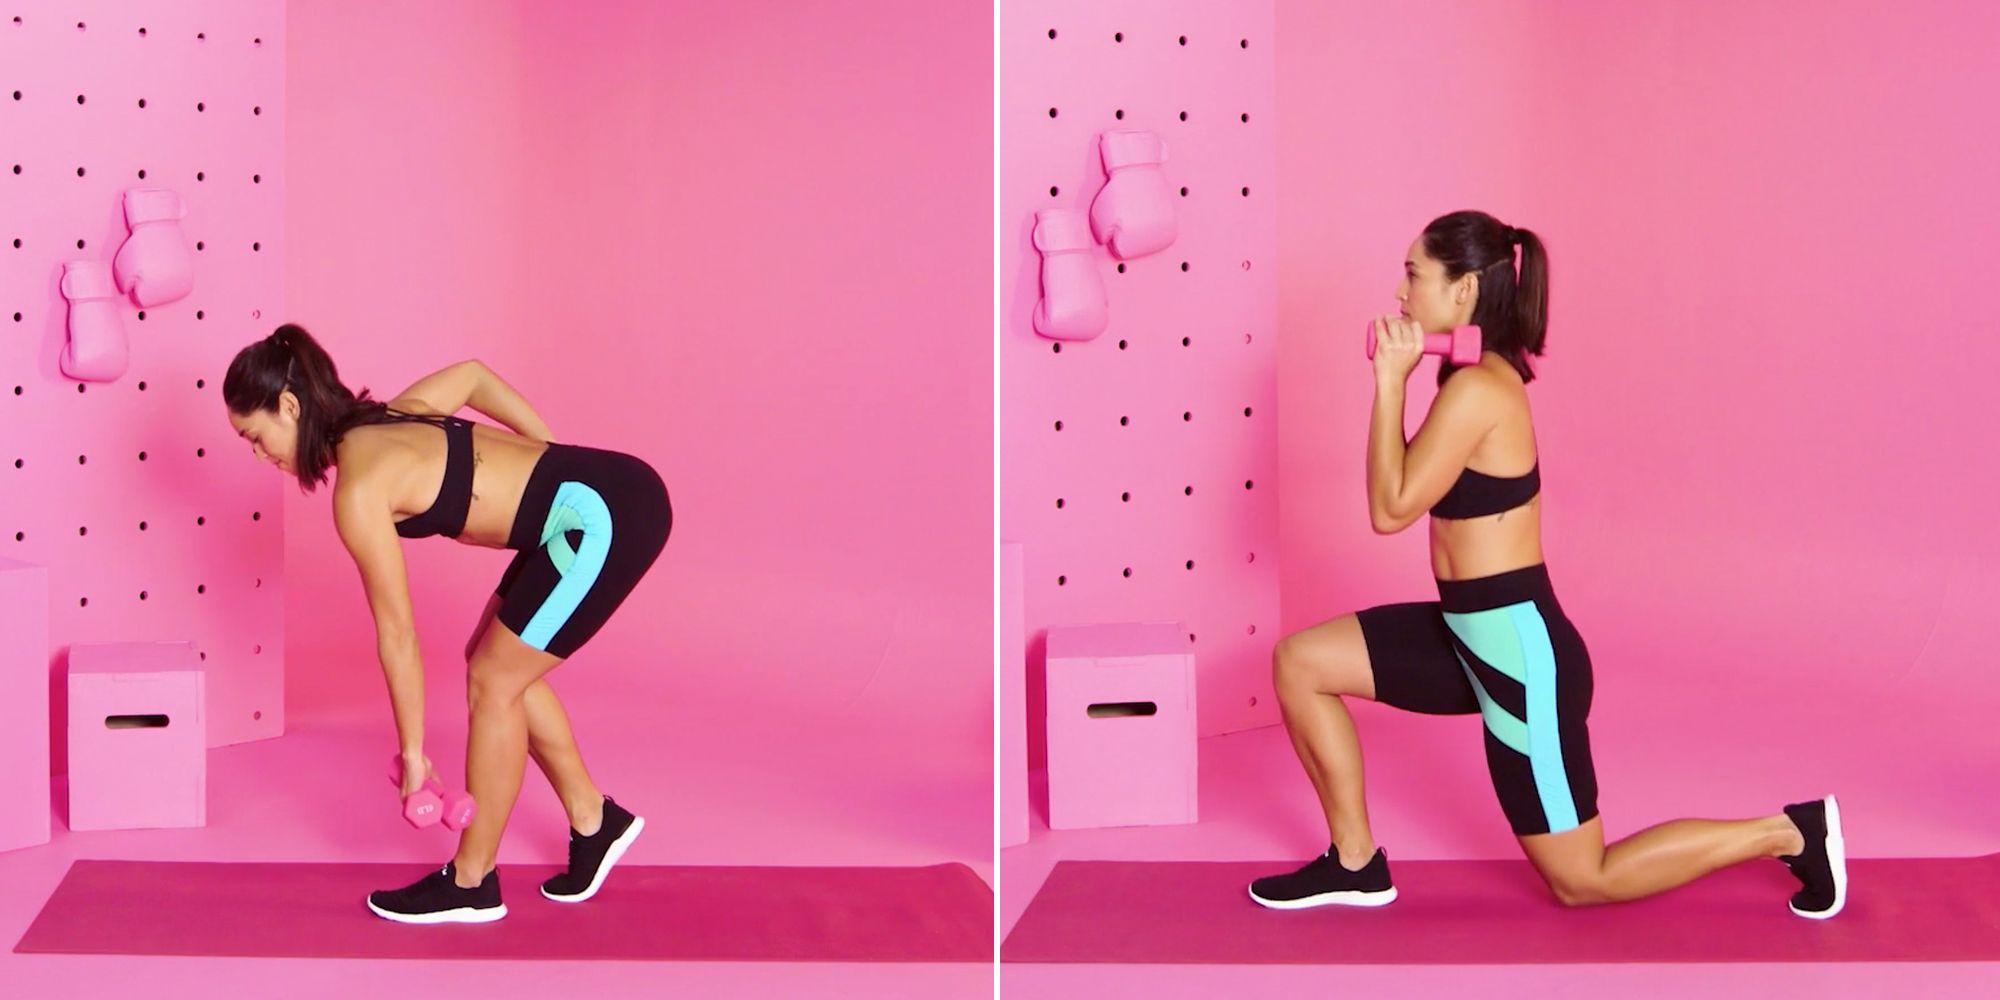 Pulse Lab - Stuck at home? This workout requires no equipment, meaning you  can do these exercises ANYWHERE. Targeting the legs, butt, core, and arms,  this is the perfect total-body workout when